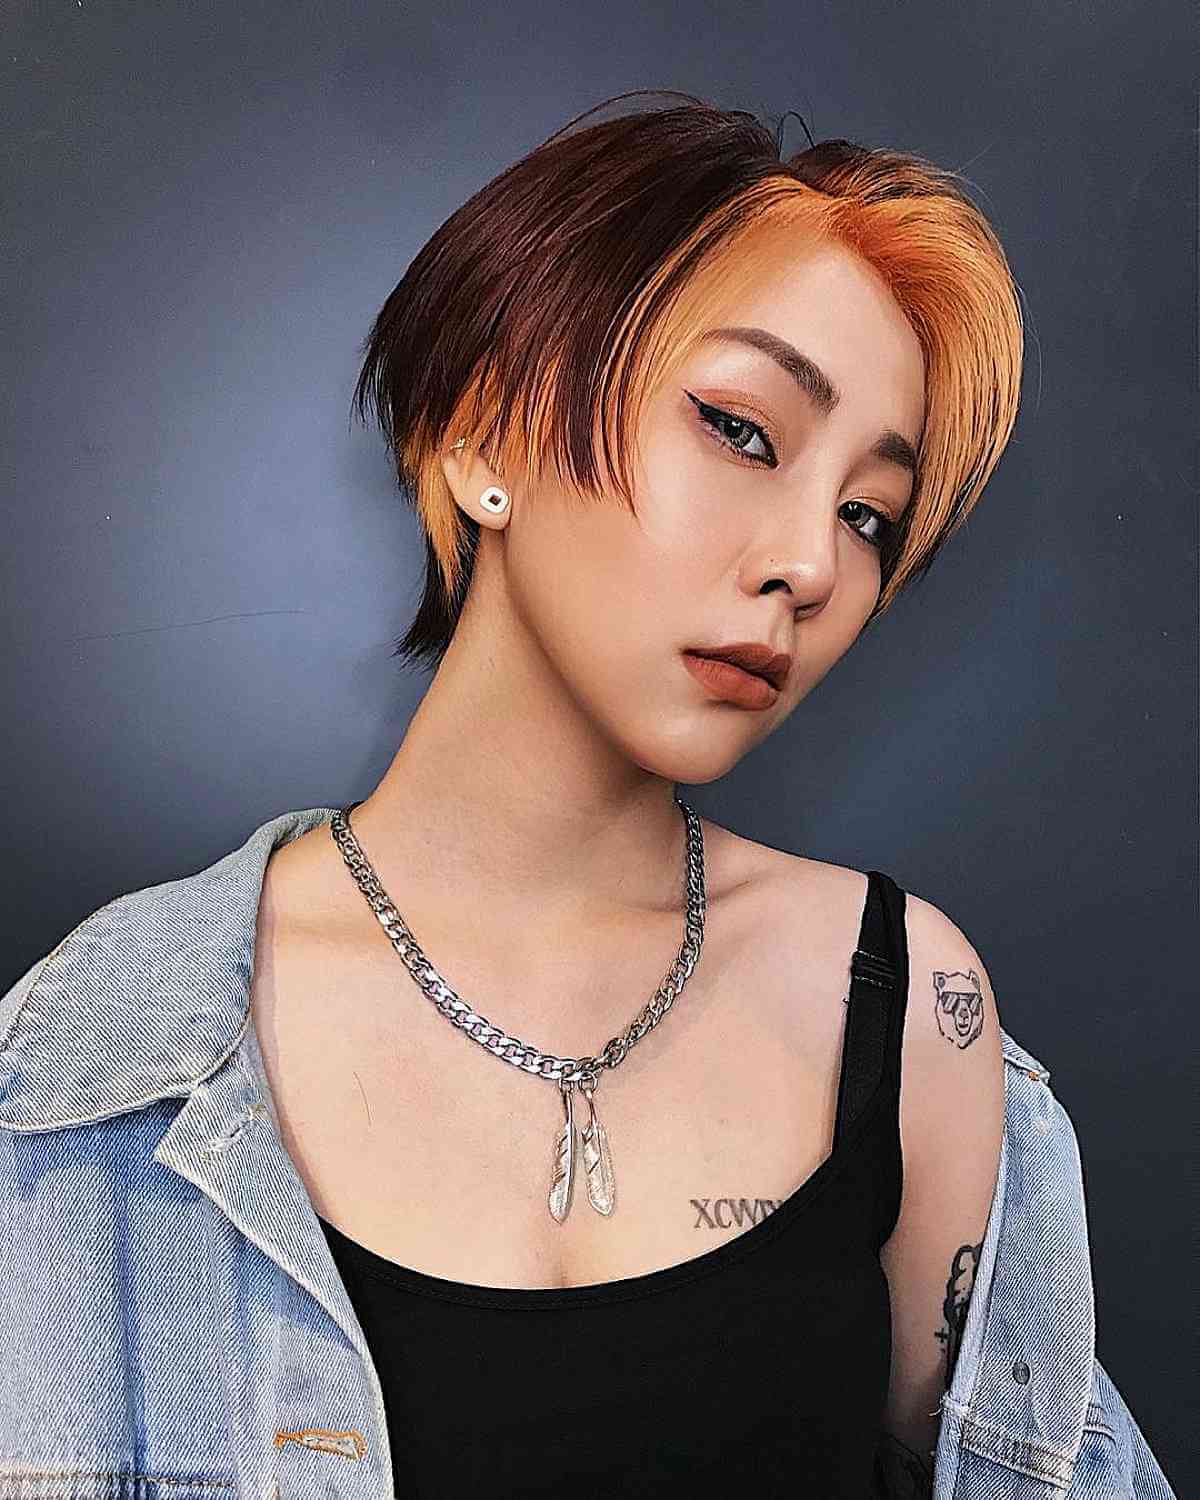 Ear-Length Edgy Pixie Mullet with an Orange Money Piece